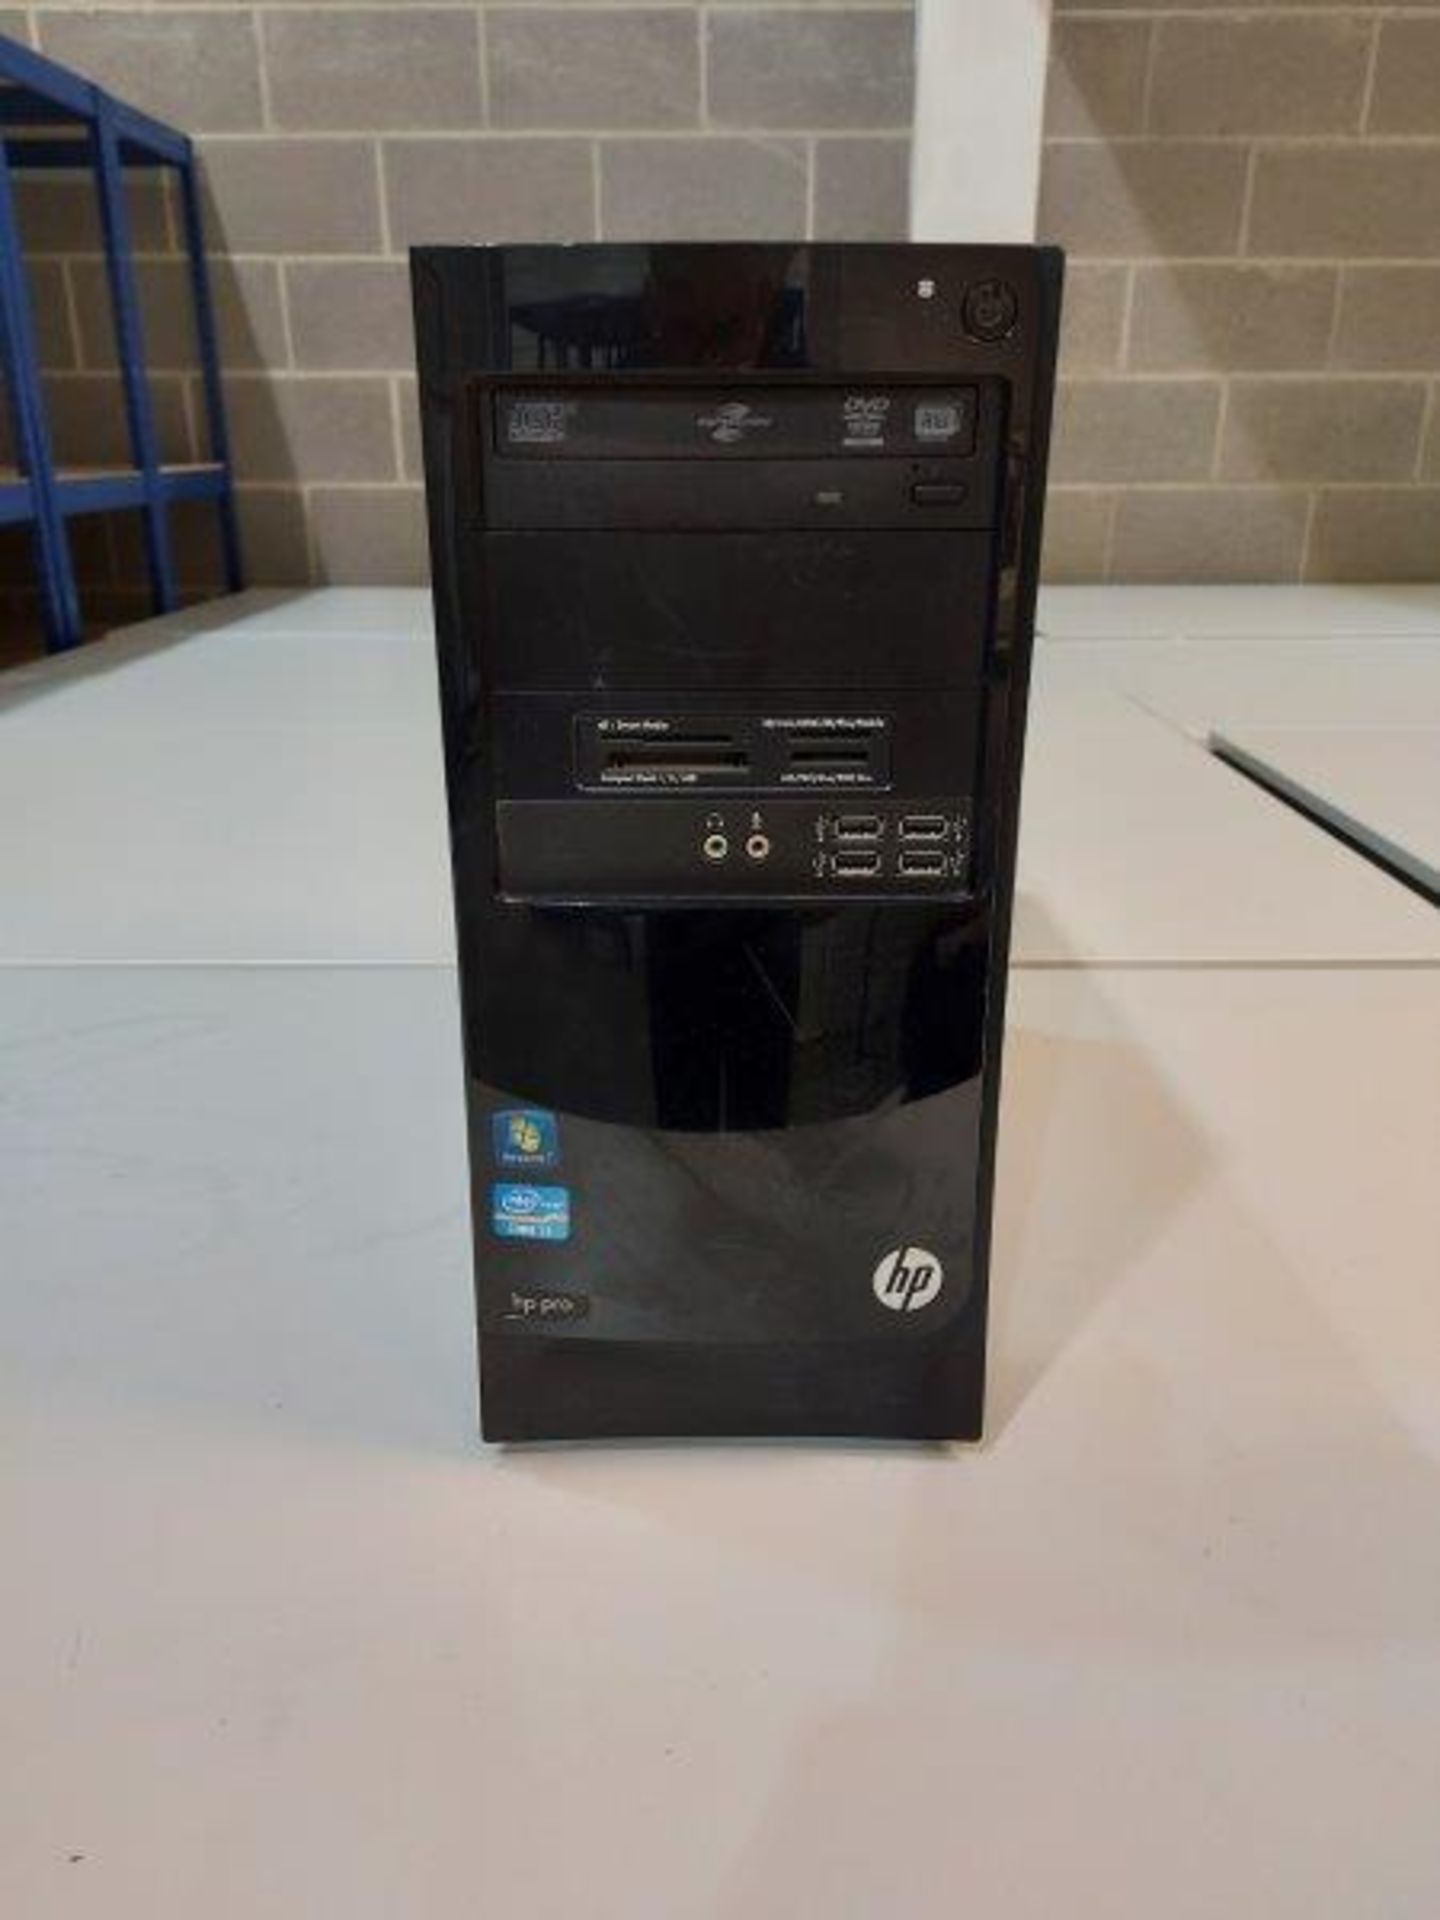 HP Pro 3300 MT personal computer